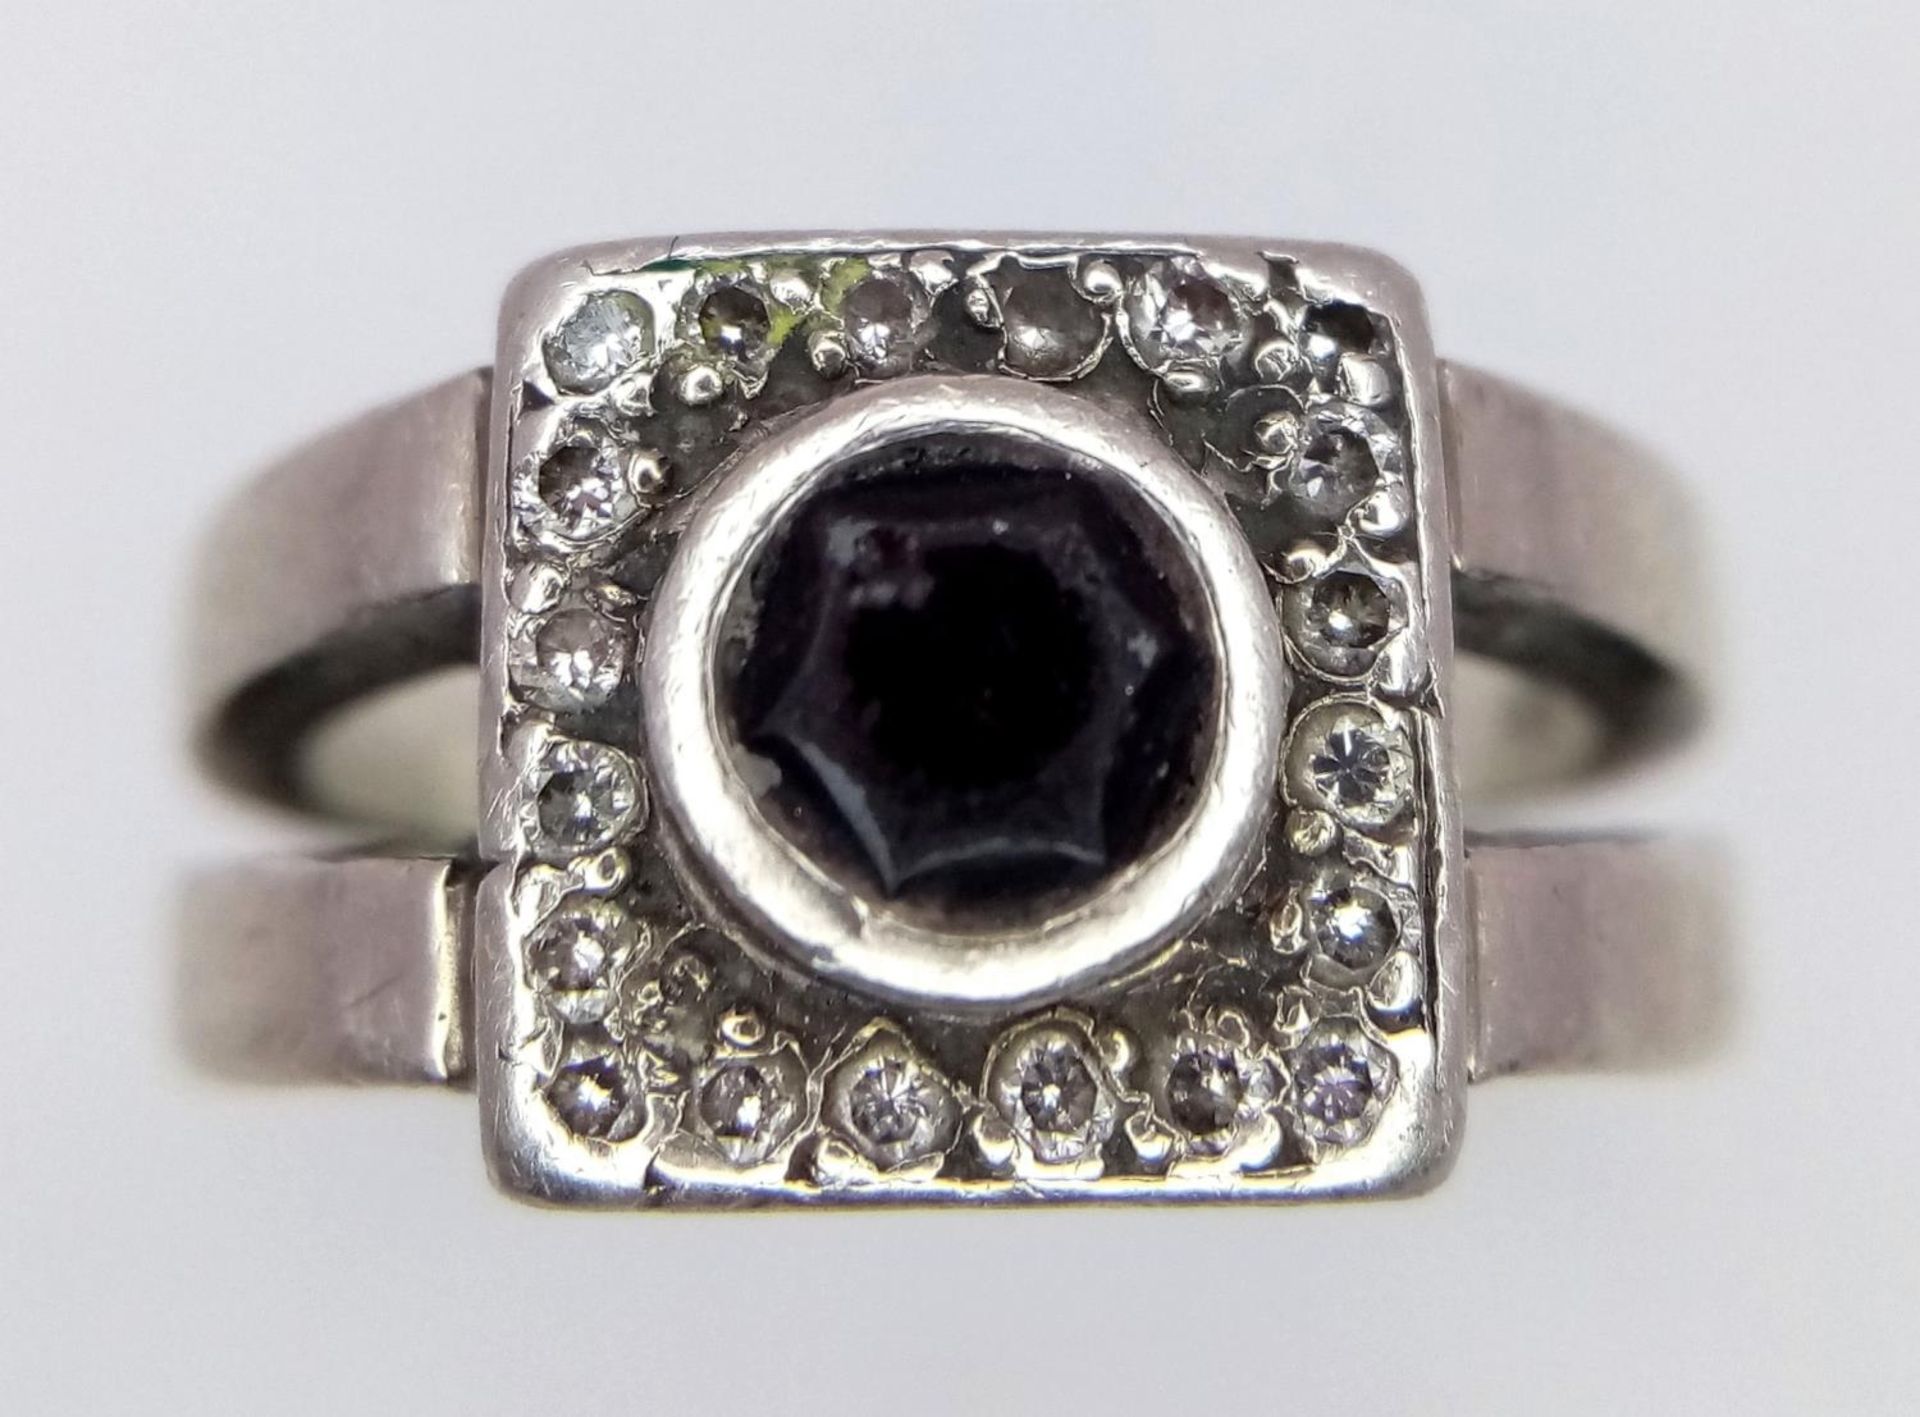 A Vintage 9K White Gold, Sapphire and Old Cut Diamond Ring. Size K. 5.3g total weight. - Image 2 of 5